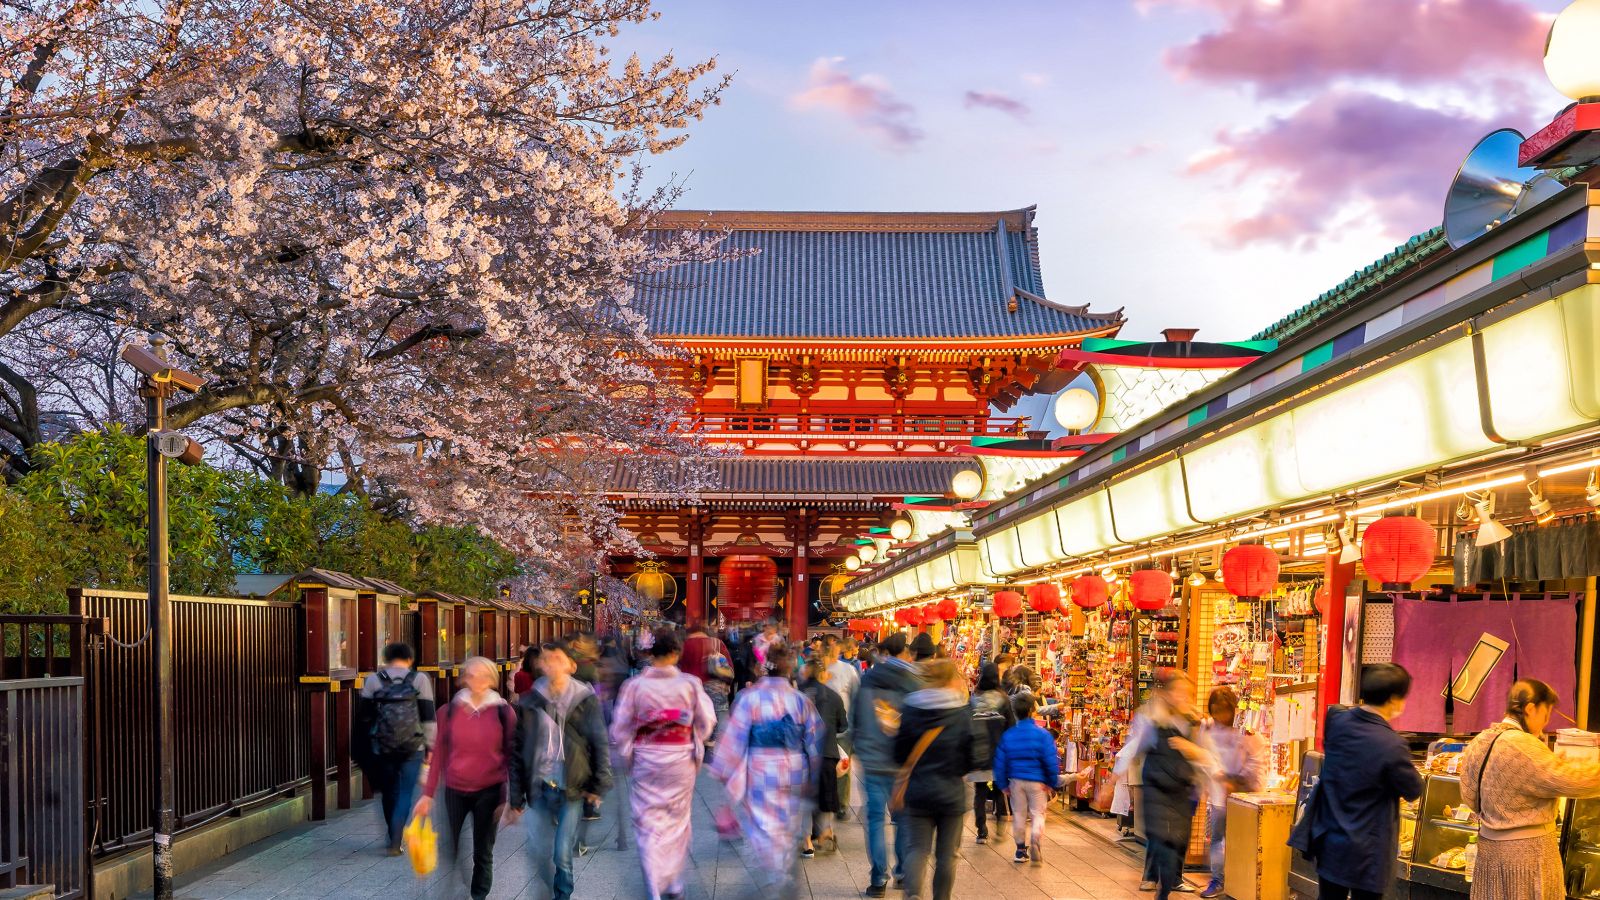 A shopping street in Tokyo with a cherry blossom tree and temple in the background